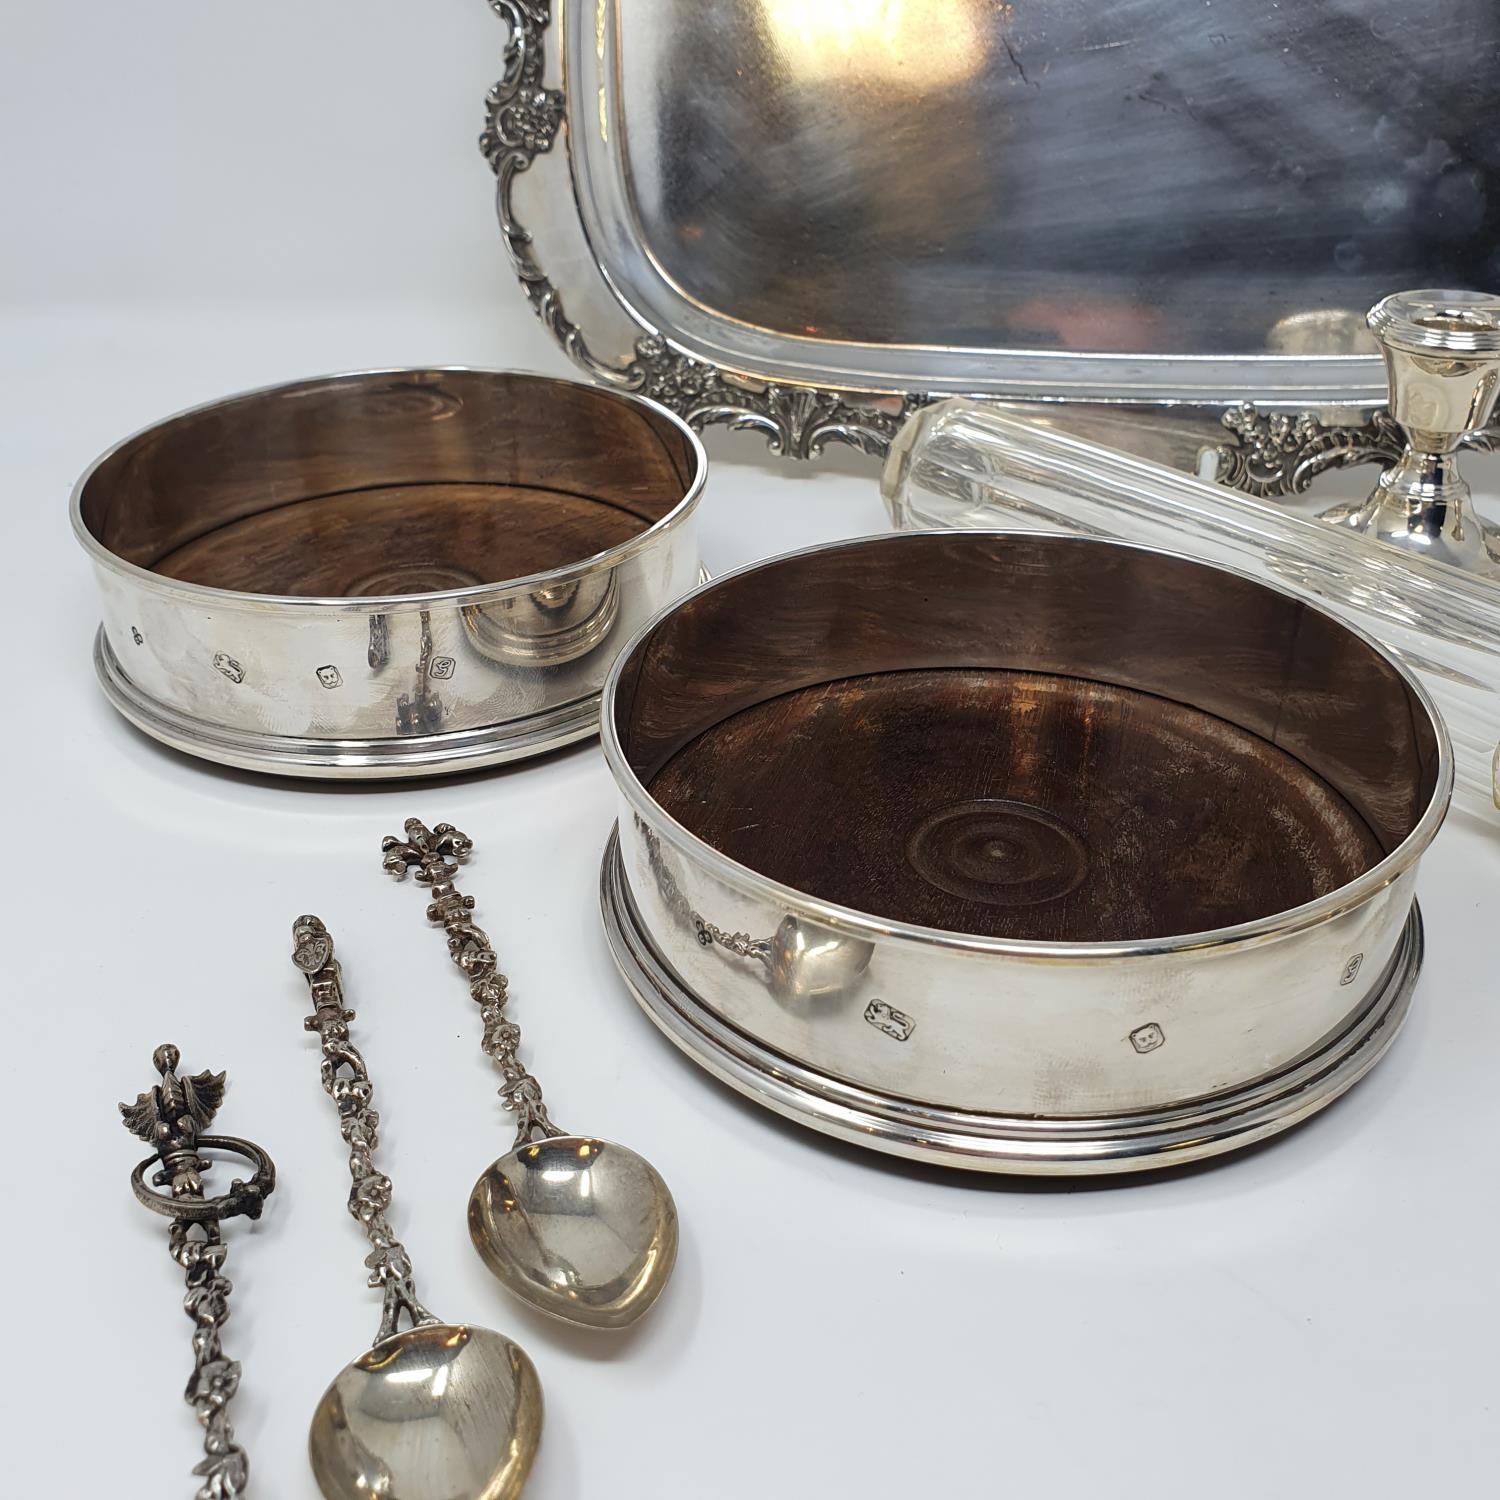 A pair of silver bottle coasters, with turned wooden bases, London 1981, 12.5 cm diameter, set of